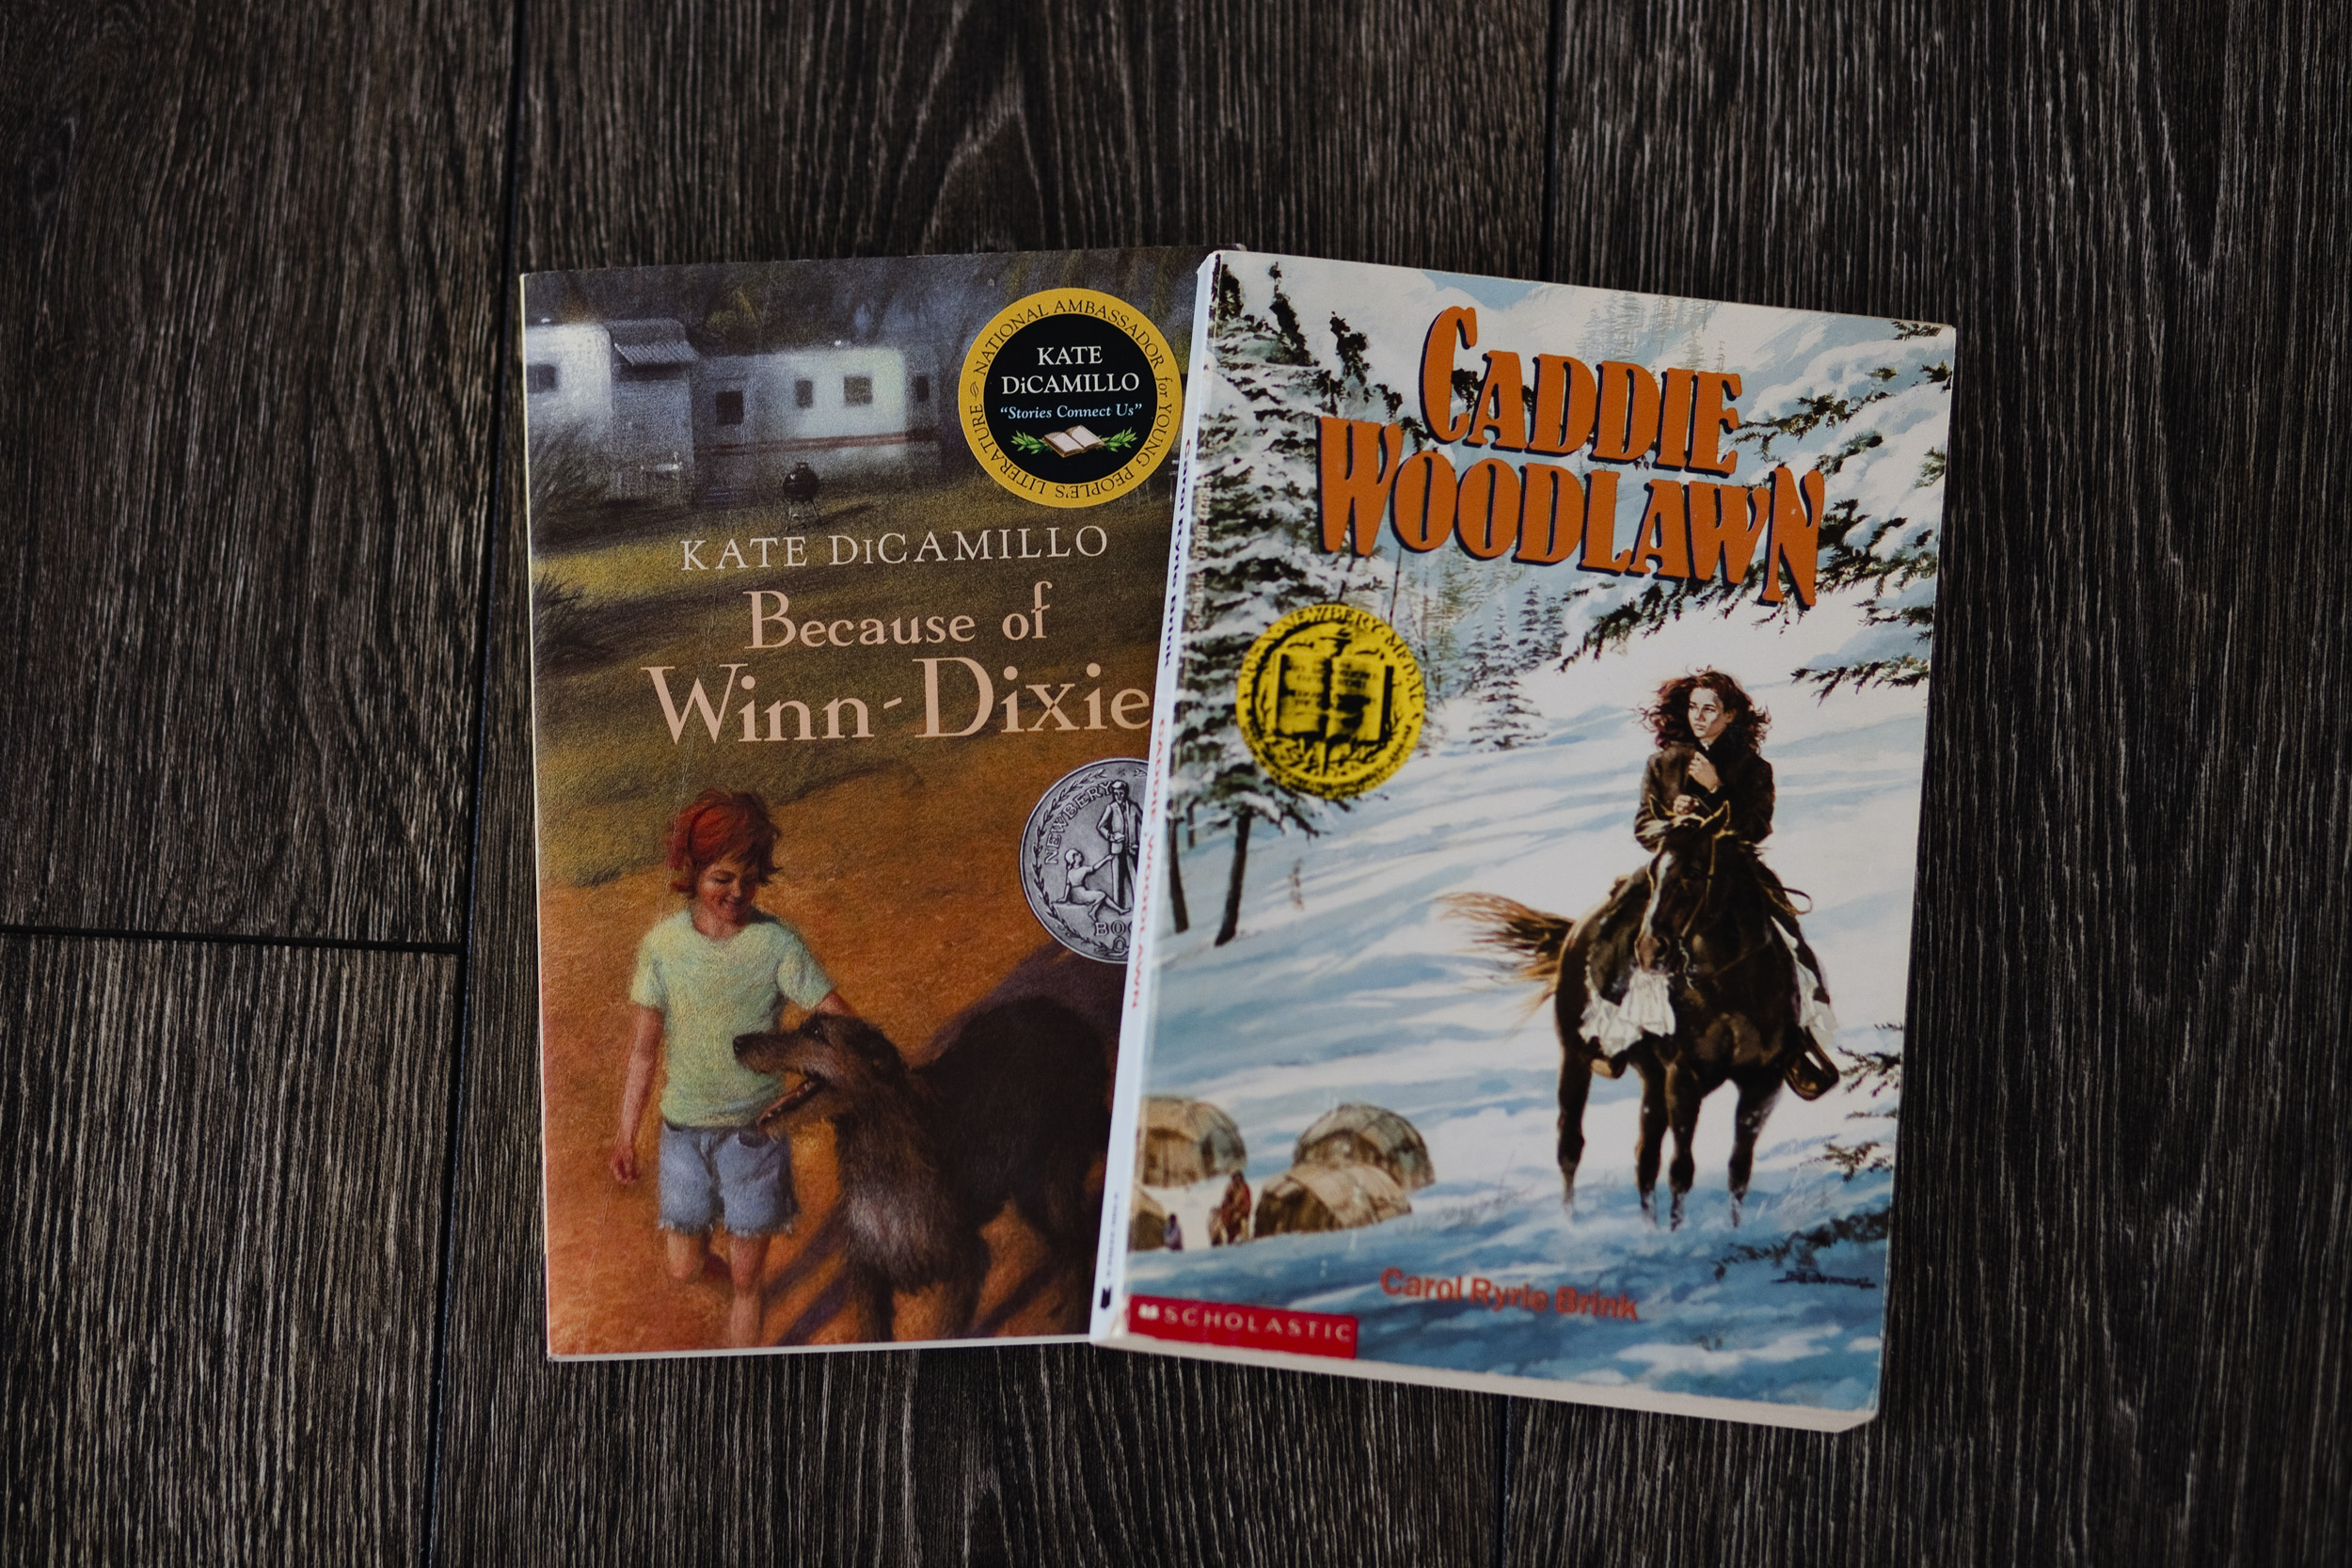 Classic books to read aloud with grade 3 and 4. They are truly classic novels the whole family will love.